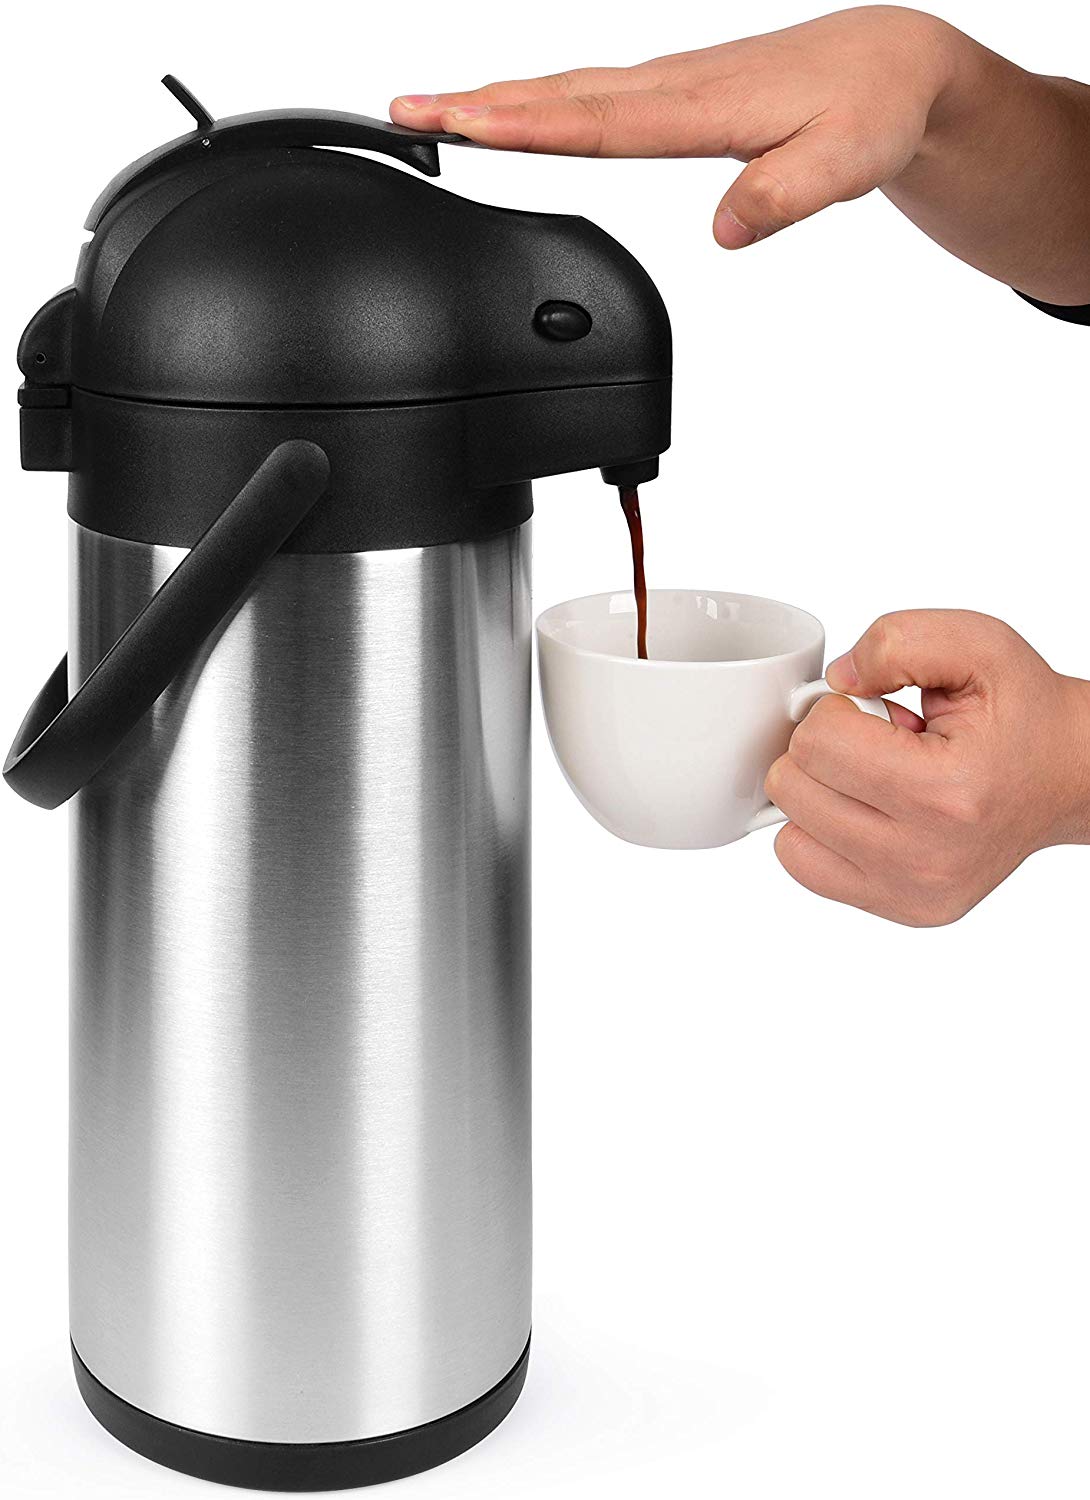  Airpot Coffee Carafe 74oz - 24 Hours Hot Drink Dispenser,  Thermal Coffee Carafe - Insulated Stainless Steel Coffee Carafes for  Keeping Hot - Drink Warmer & Airpot Coffee Dispenser with Pump 